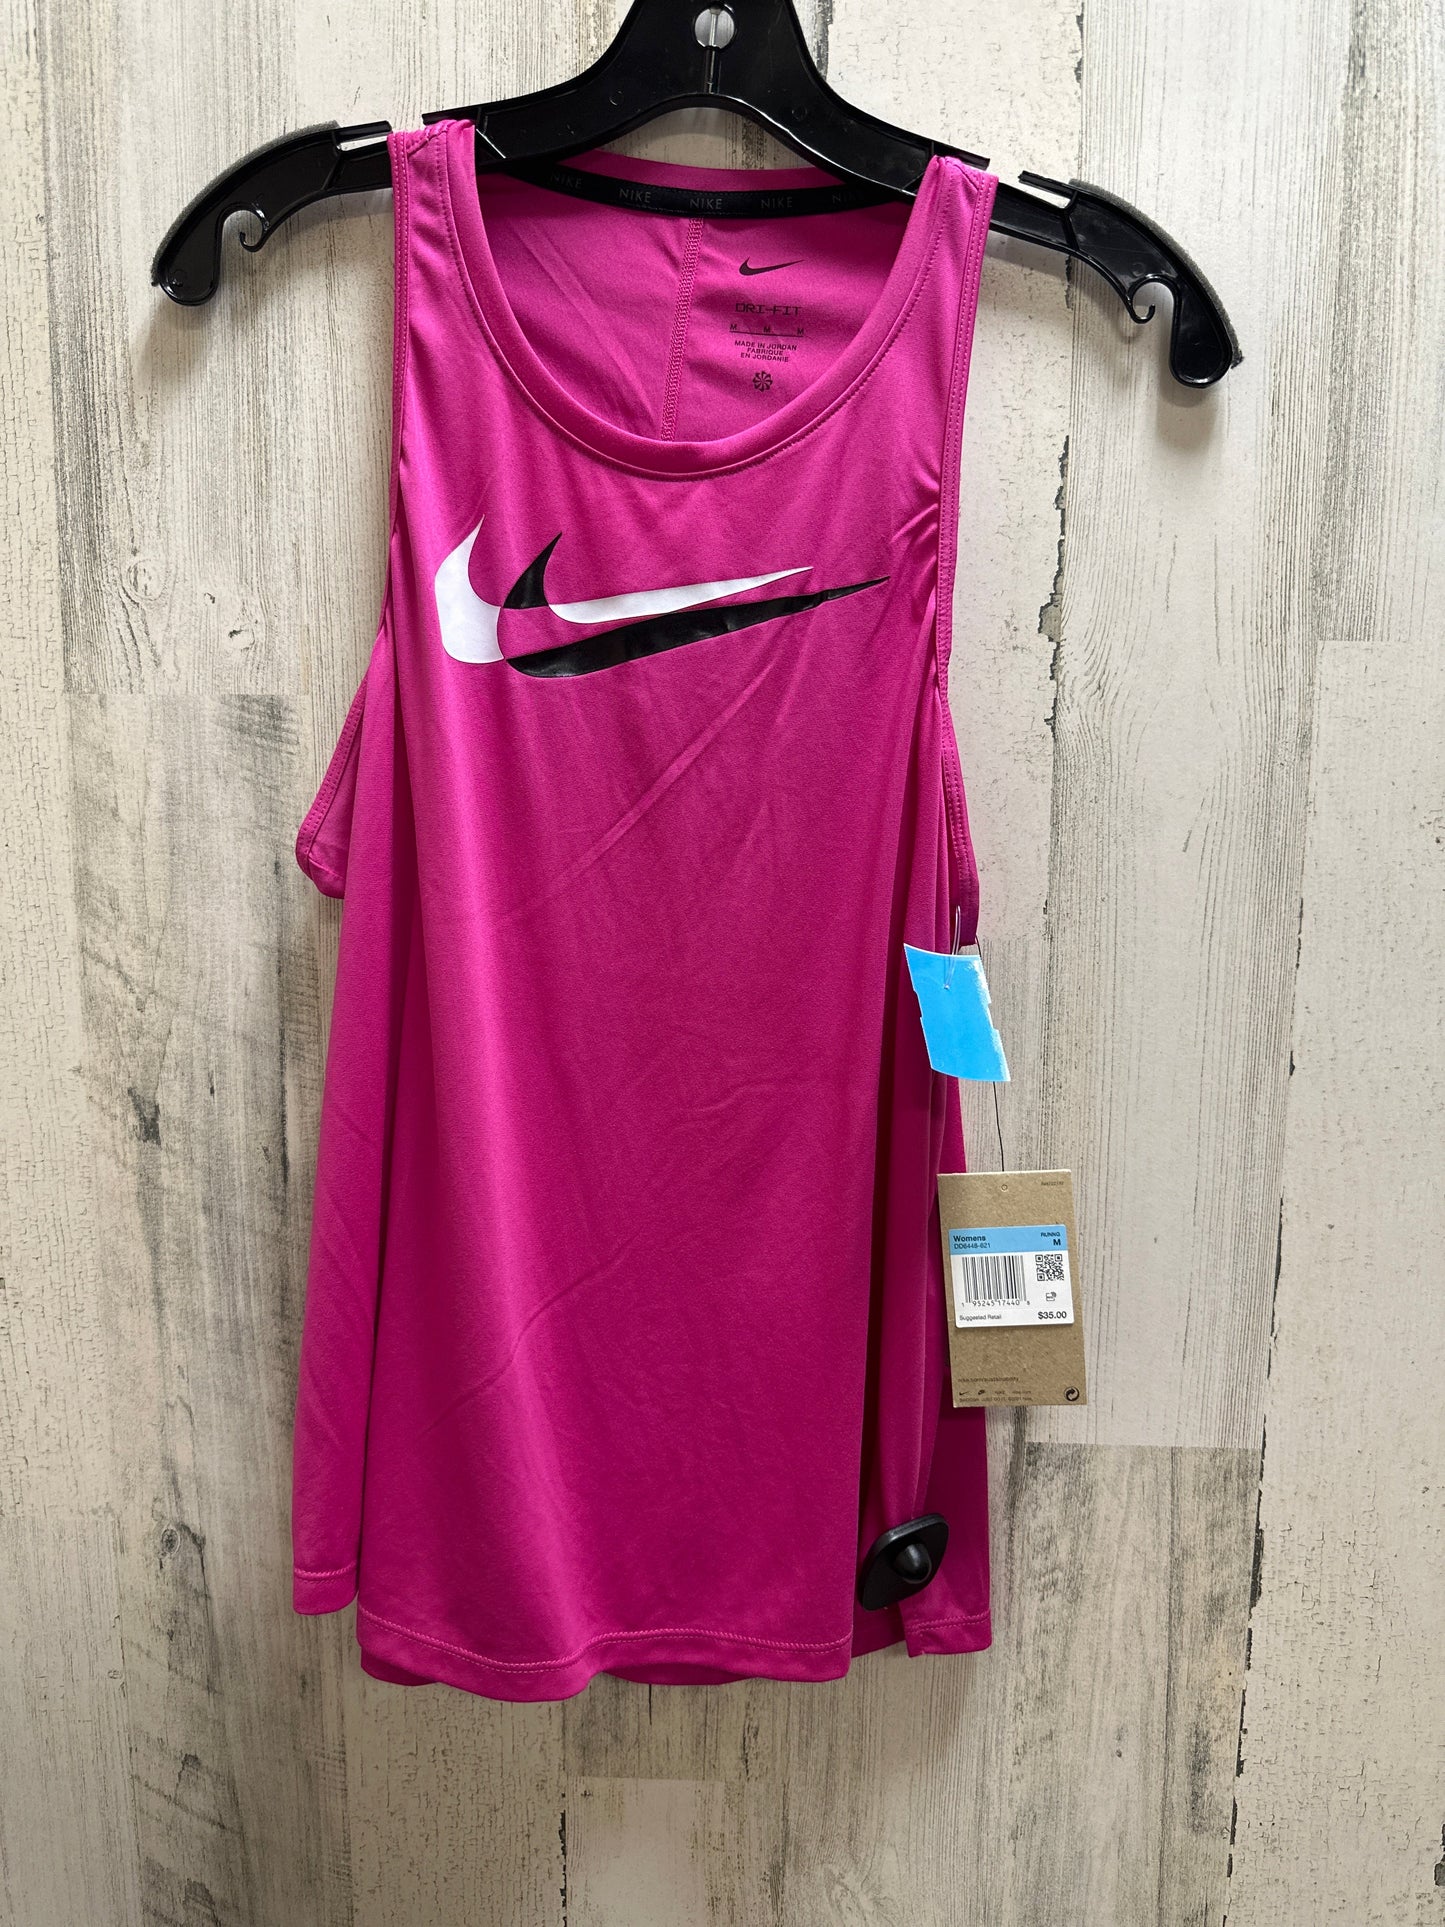 Athletic Tank Top By Nike Apparel  Size: M